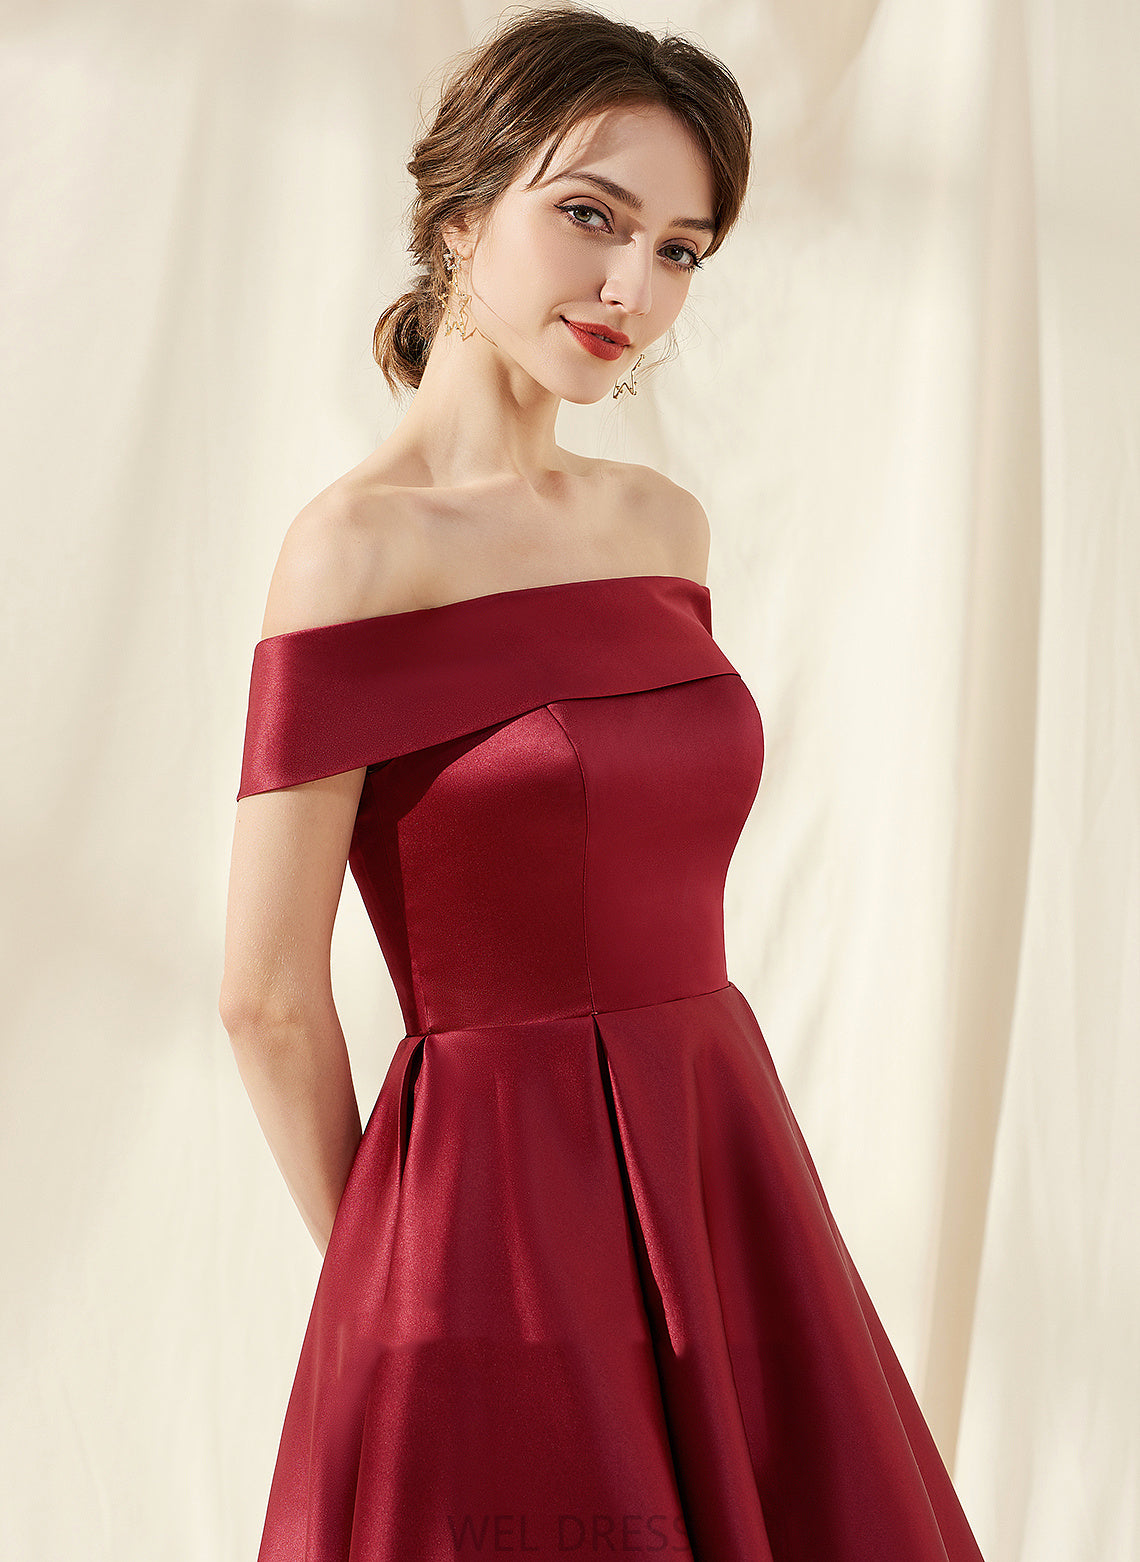 Homecoming Anika Dress Off-the-Shoulder Pockets Asymmetrical Satin A-Line With Homecoming Dresses